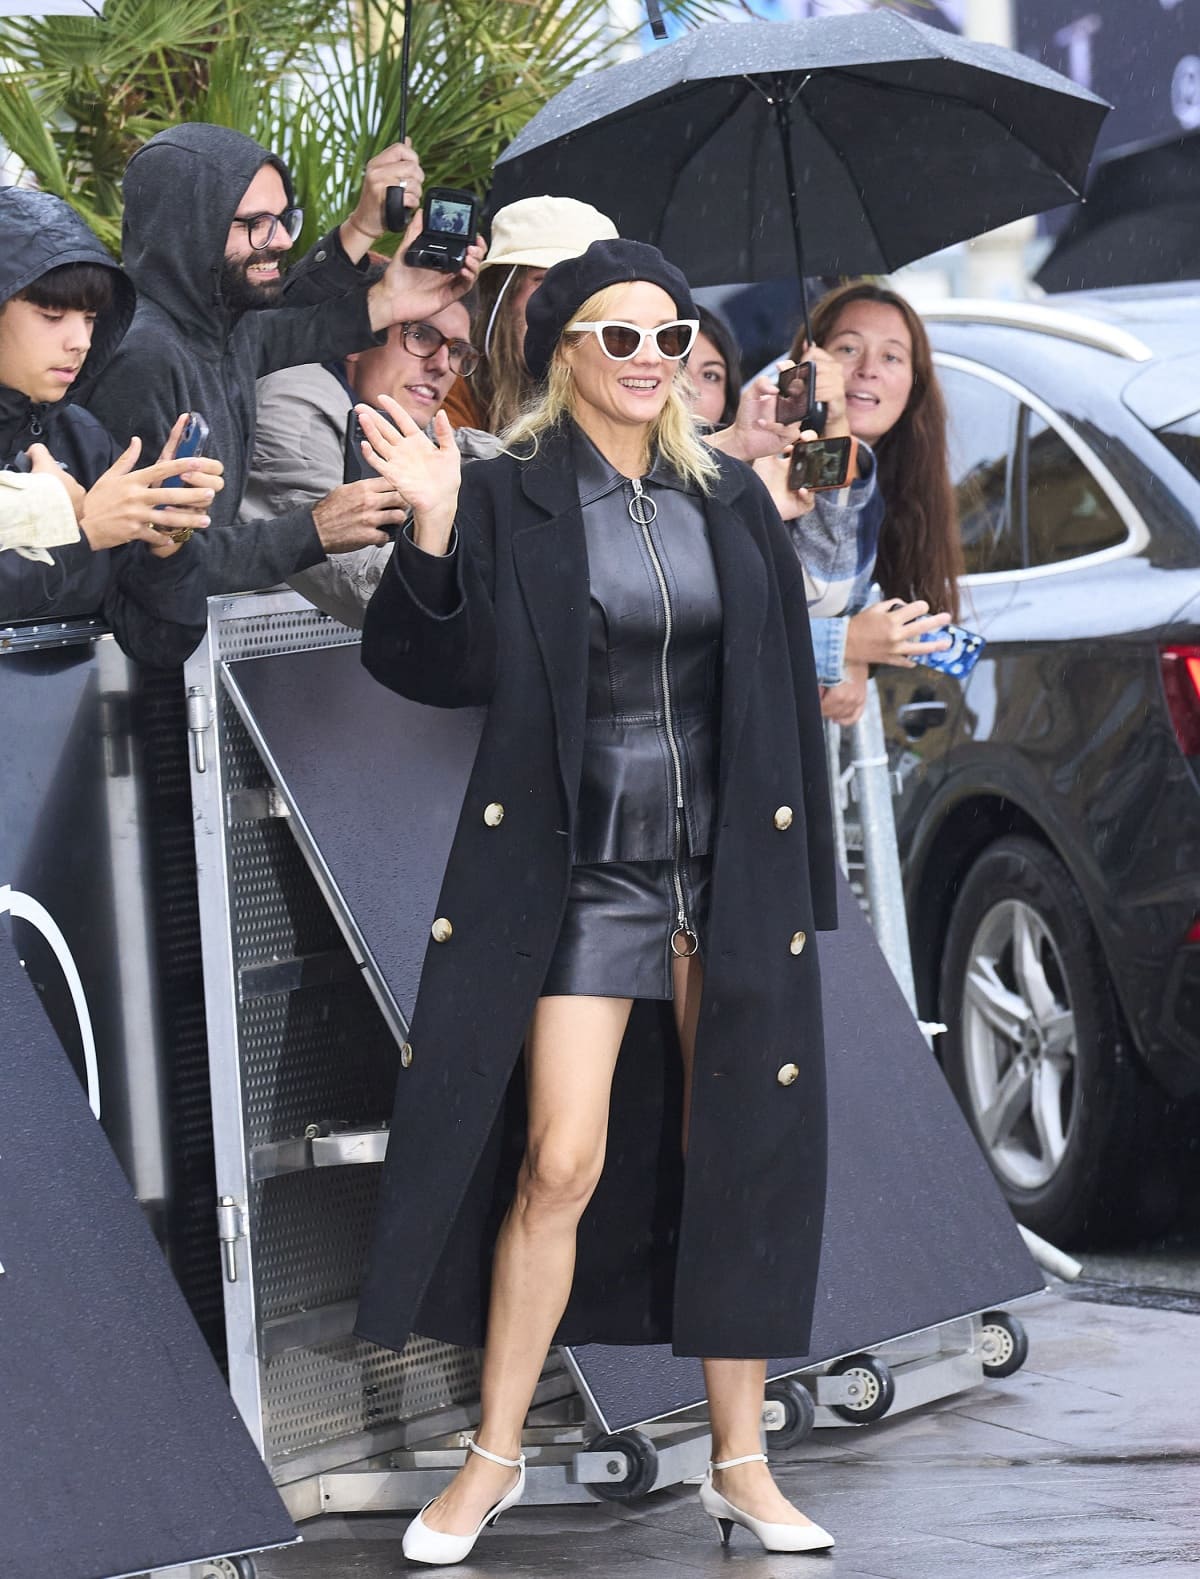 Diane Kruger posing with fans in a black leather dress, a beret, cat-eye sunglasses, and white ankle-strap pumps